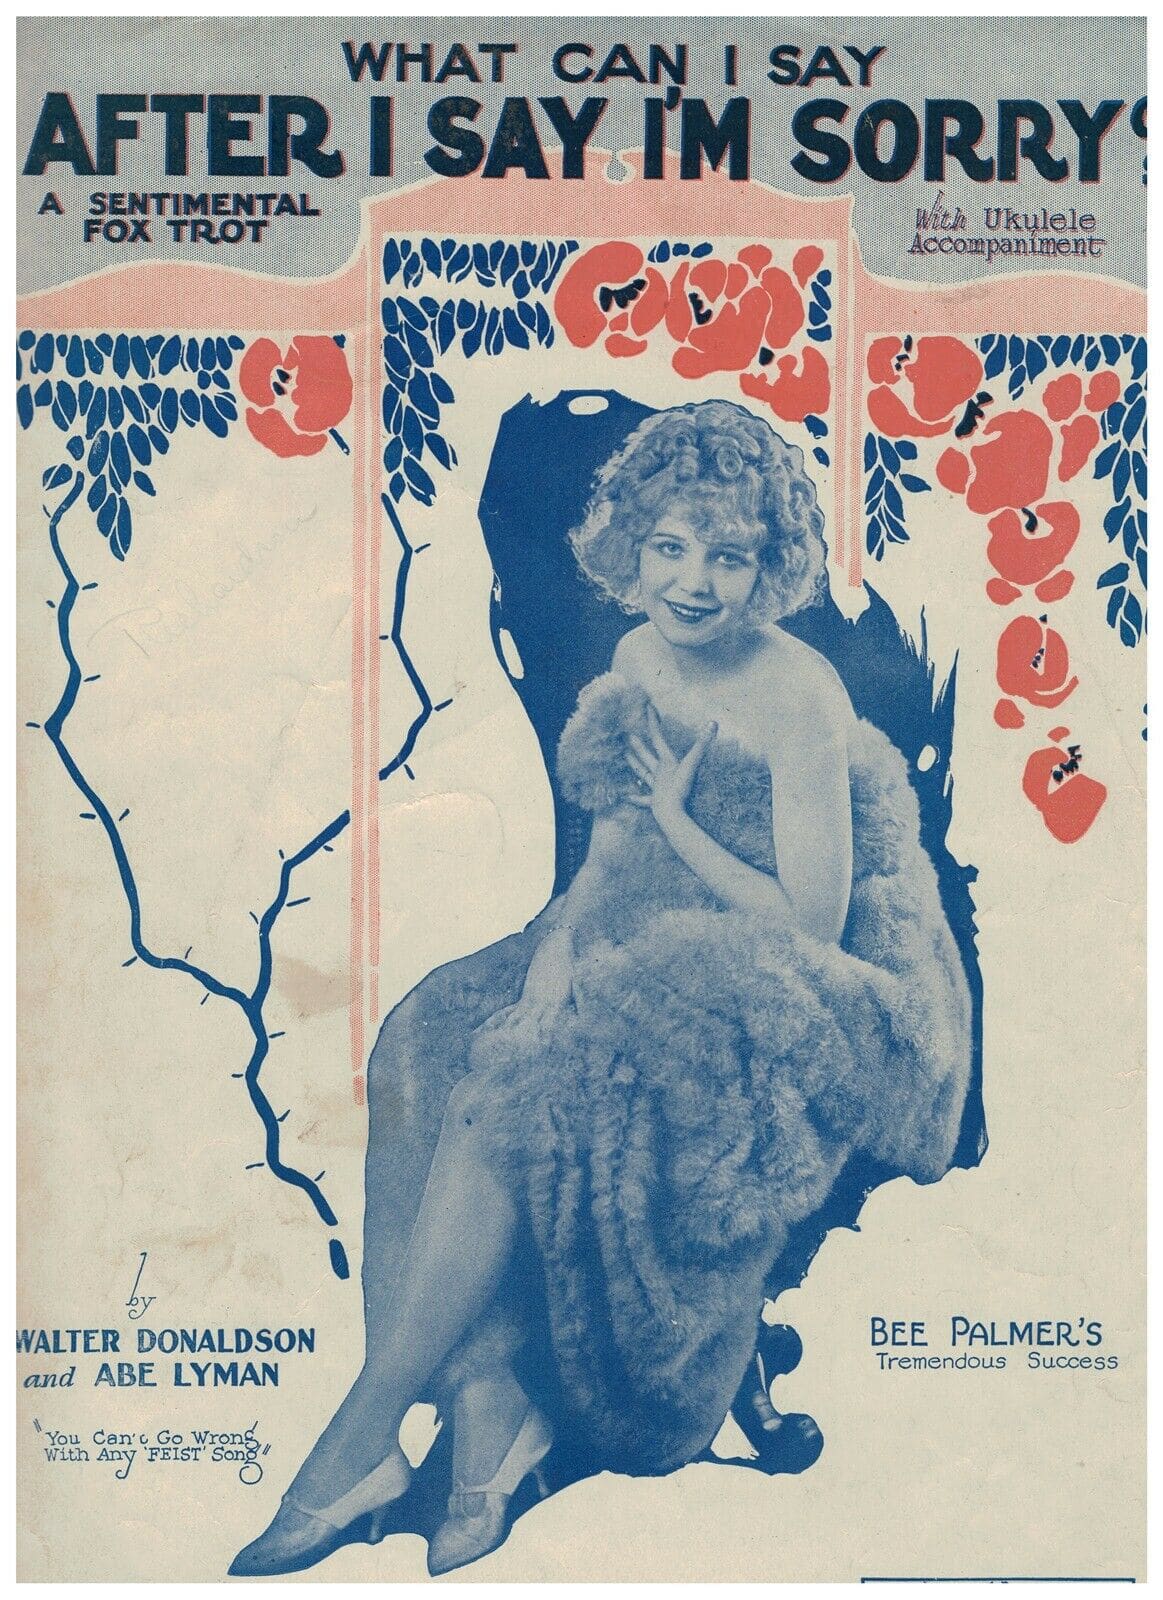 A vintage photo on the cover of a piece of sheet music depicts a flapper-looking woman in a bare-shouldered, frothy gown, clutching a hand to her bosom and smiling (maybe sadly? maybe ominously?) at the camera